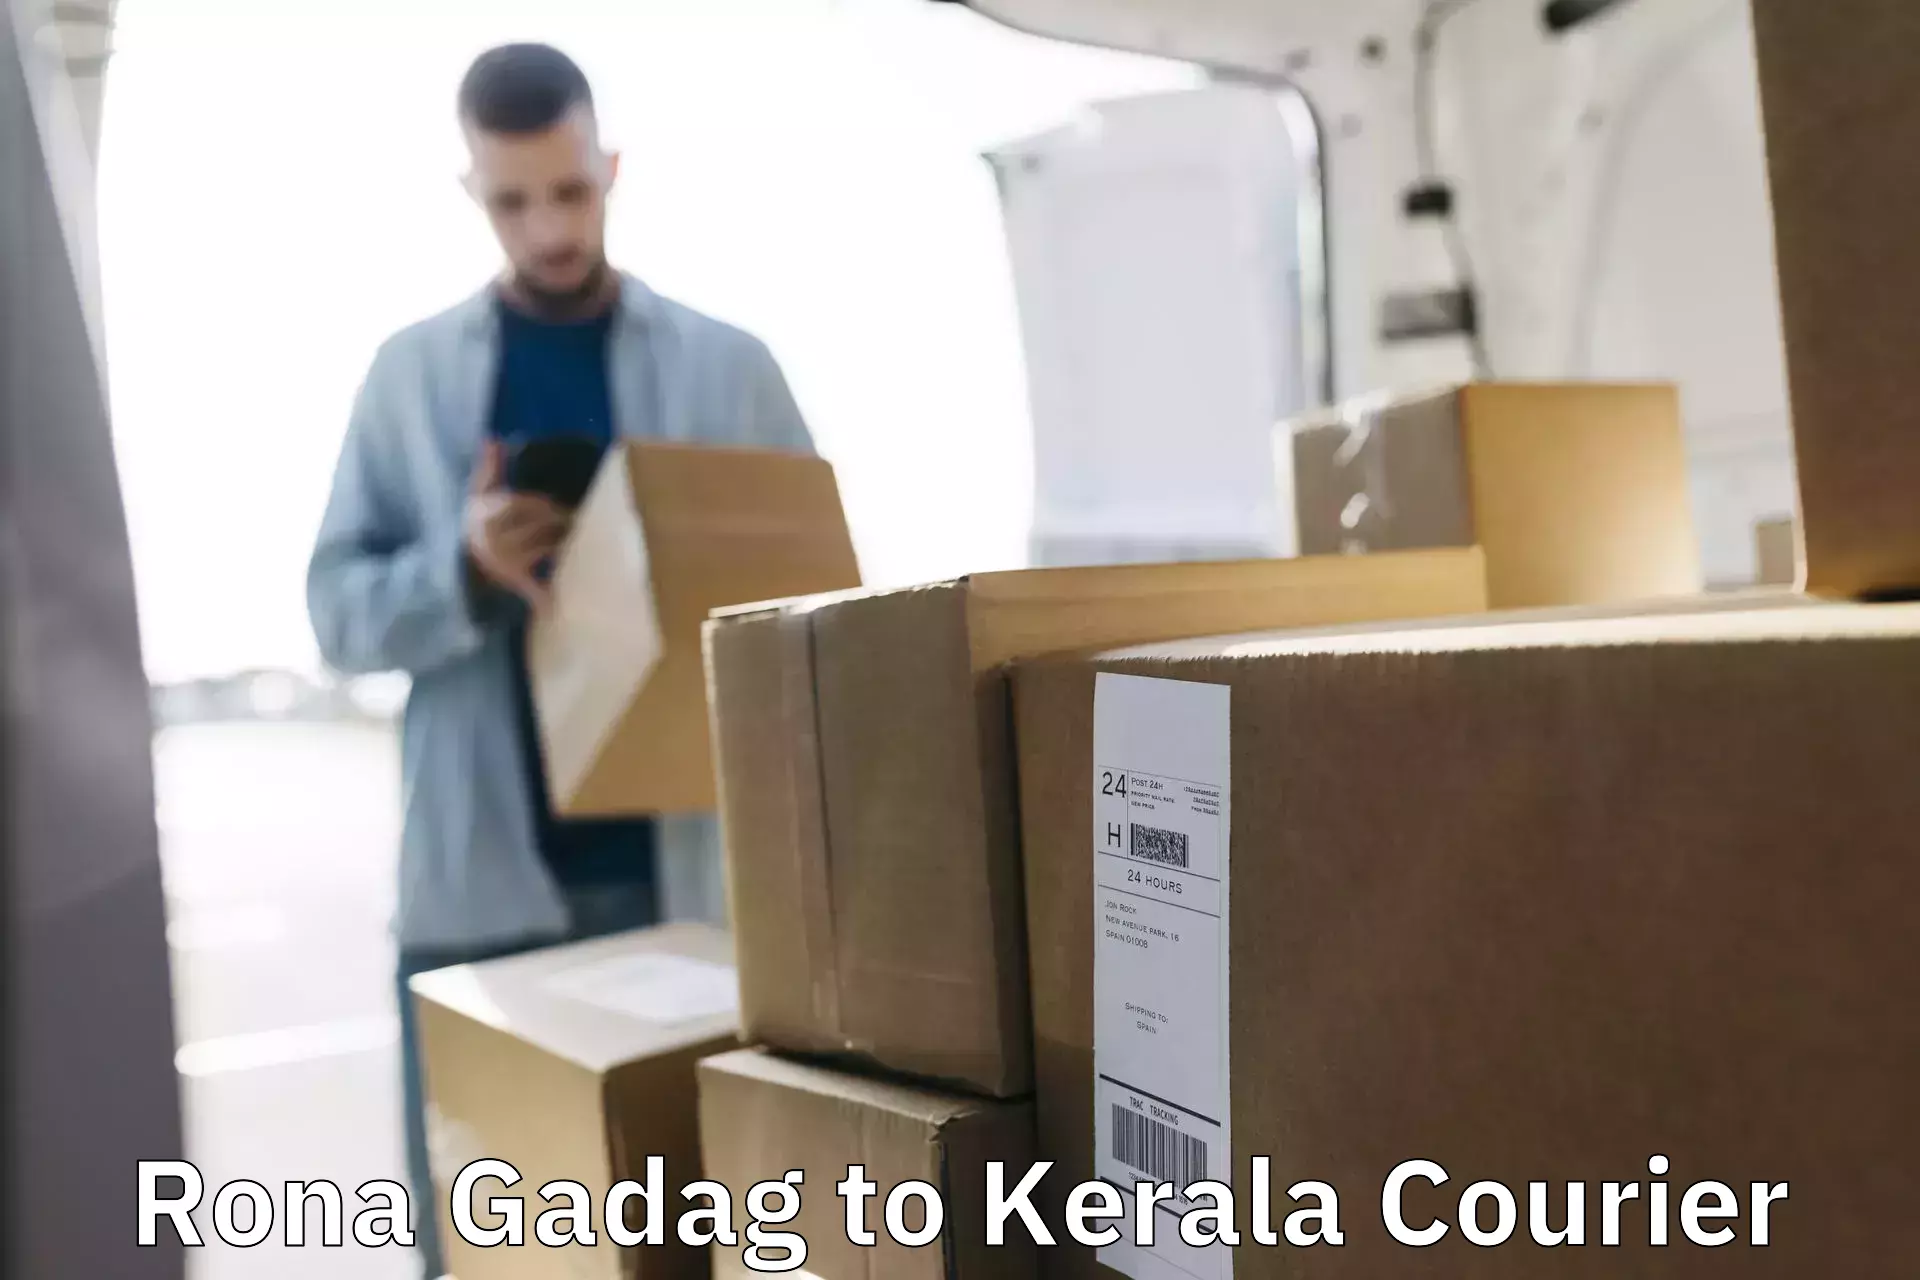 High-quality delivery services Rona Gadag to Kalanjoor